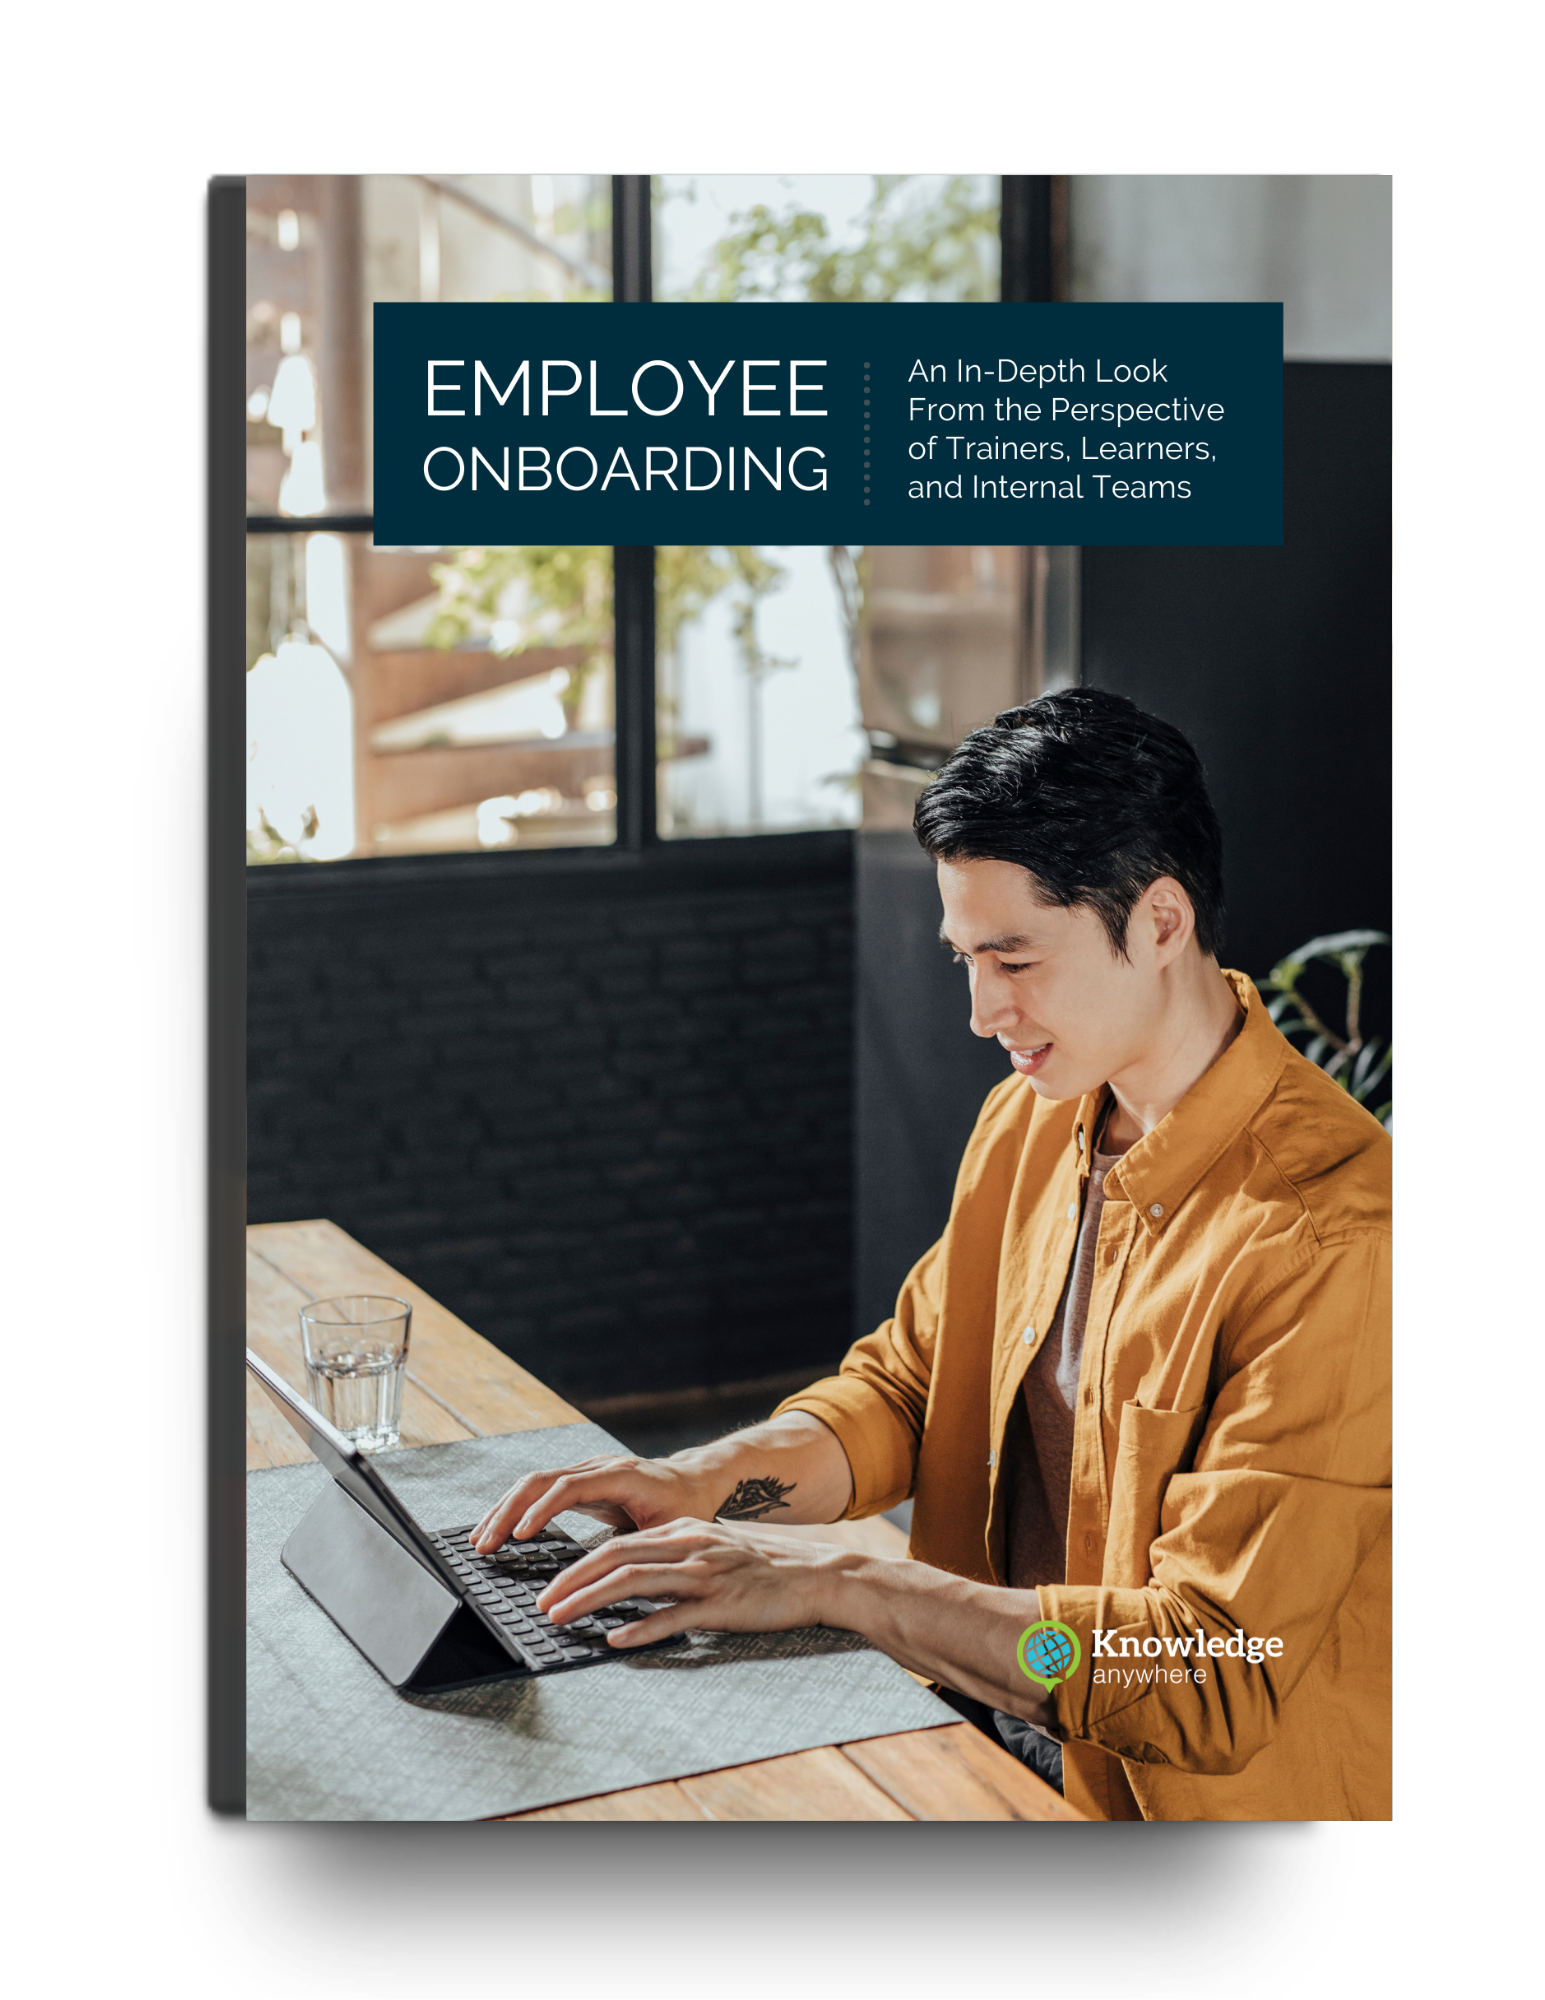 Employee Onboarding eBook: An In-Depth Look From the Perspective of Trainers, Learners, and Internal Teams